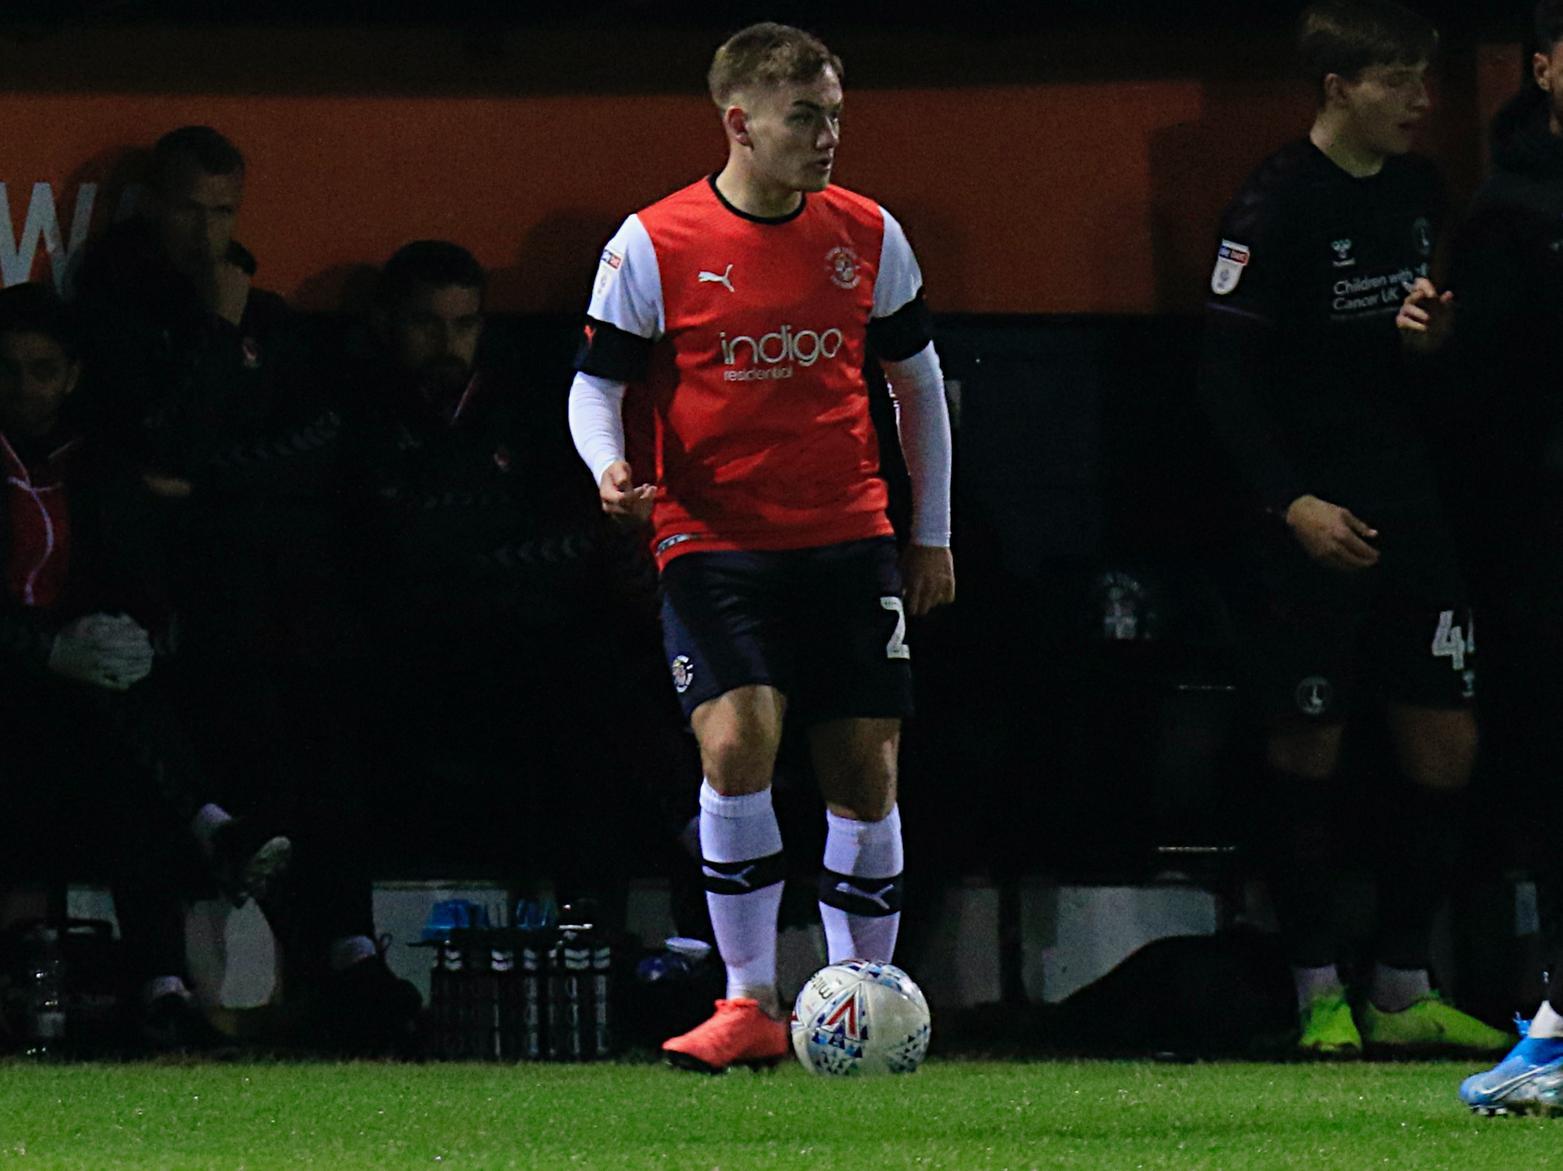 On for Tunnicliffe and held his shape well as Luton saw out the final 10 minutes to earn a crucial victory.